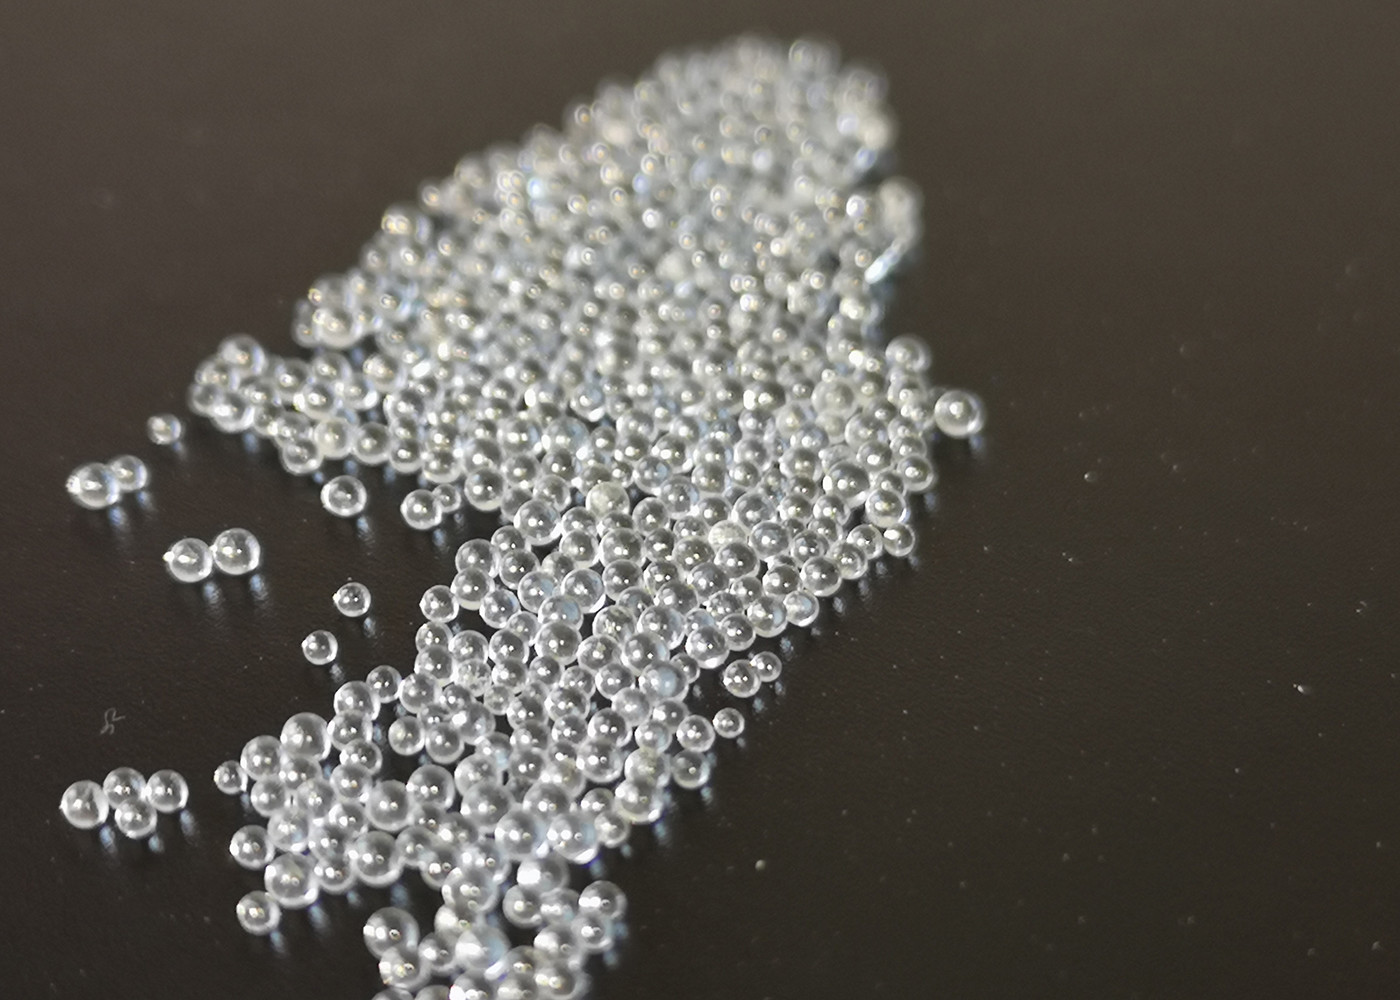 1.5-1.6 Index Micro Glass Beads , Silicon Dioxide Reflective Glass Beads